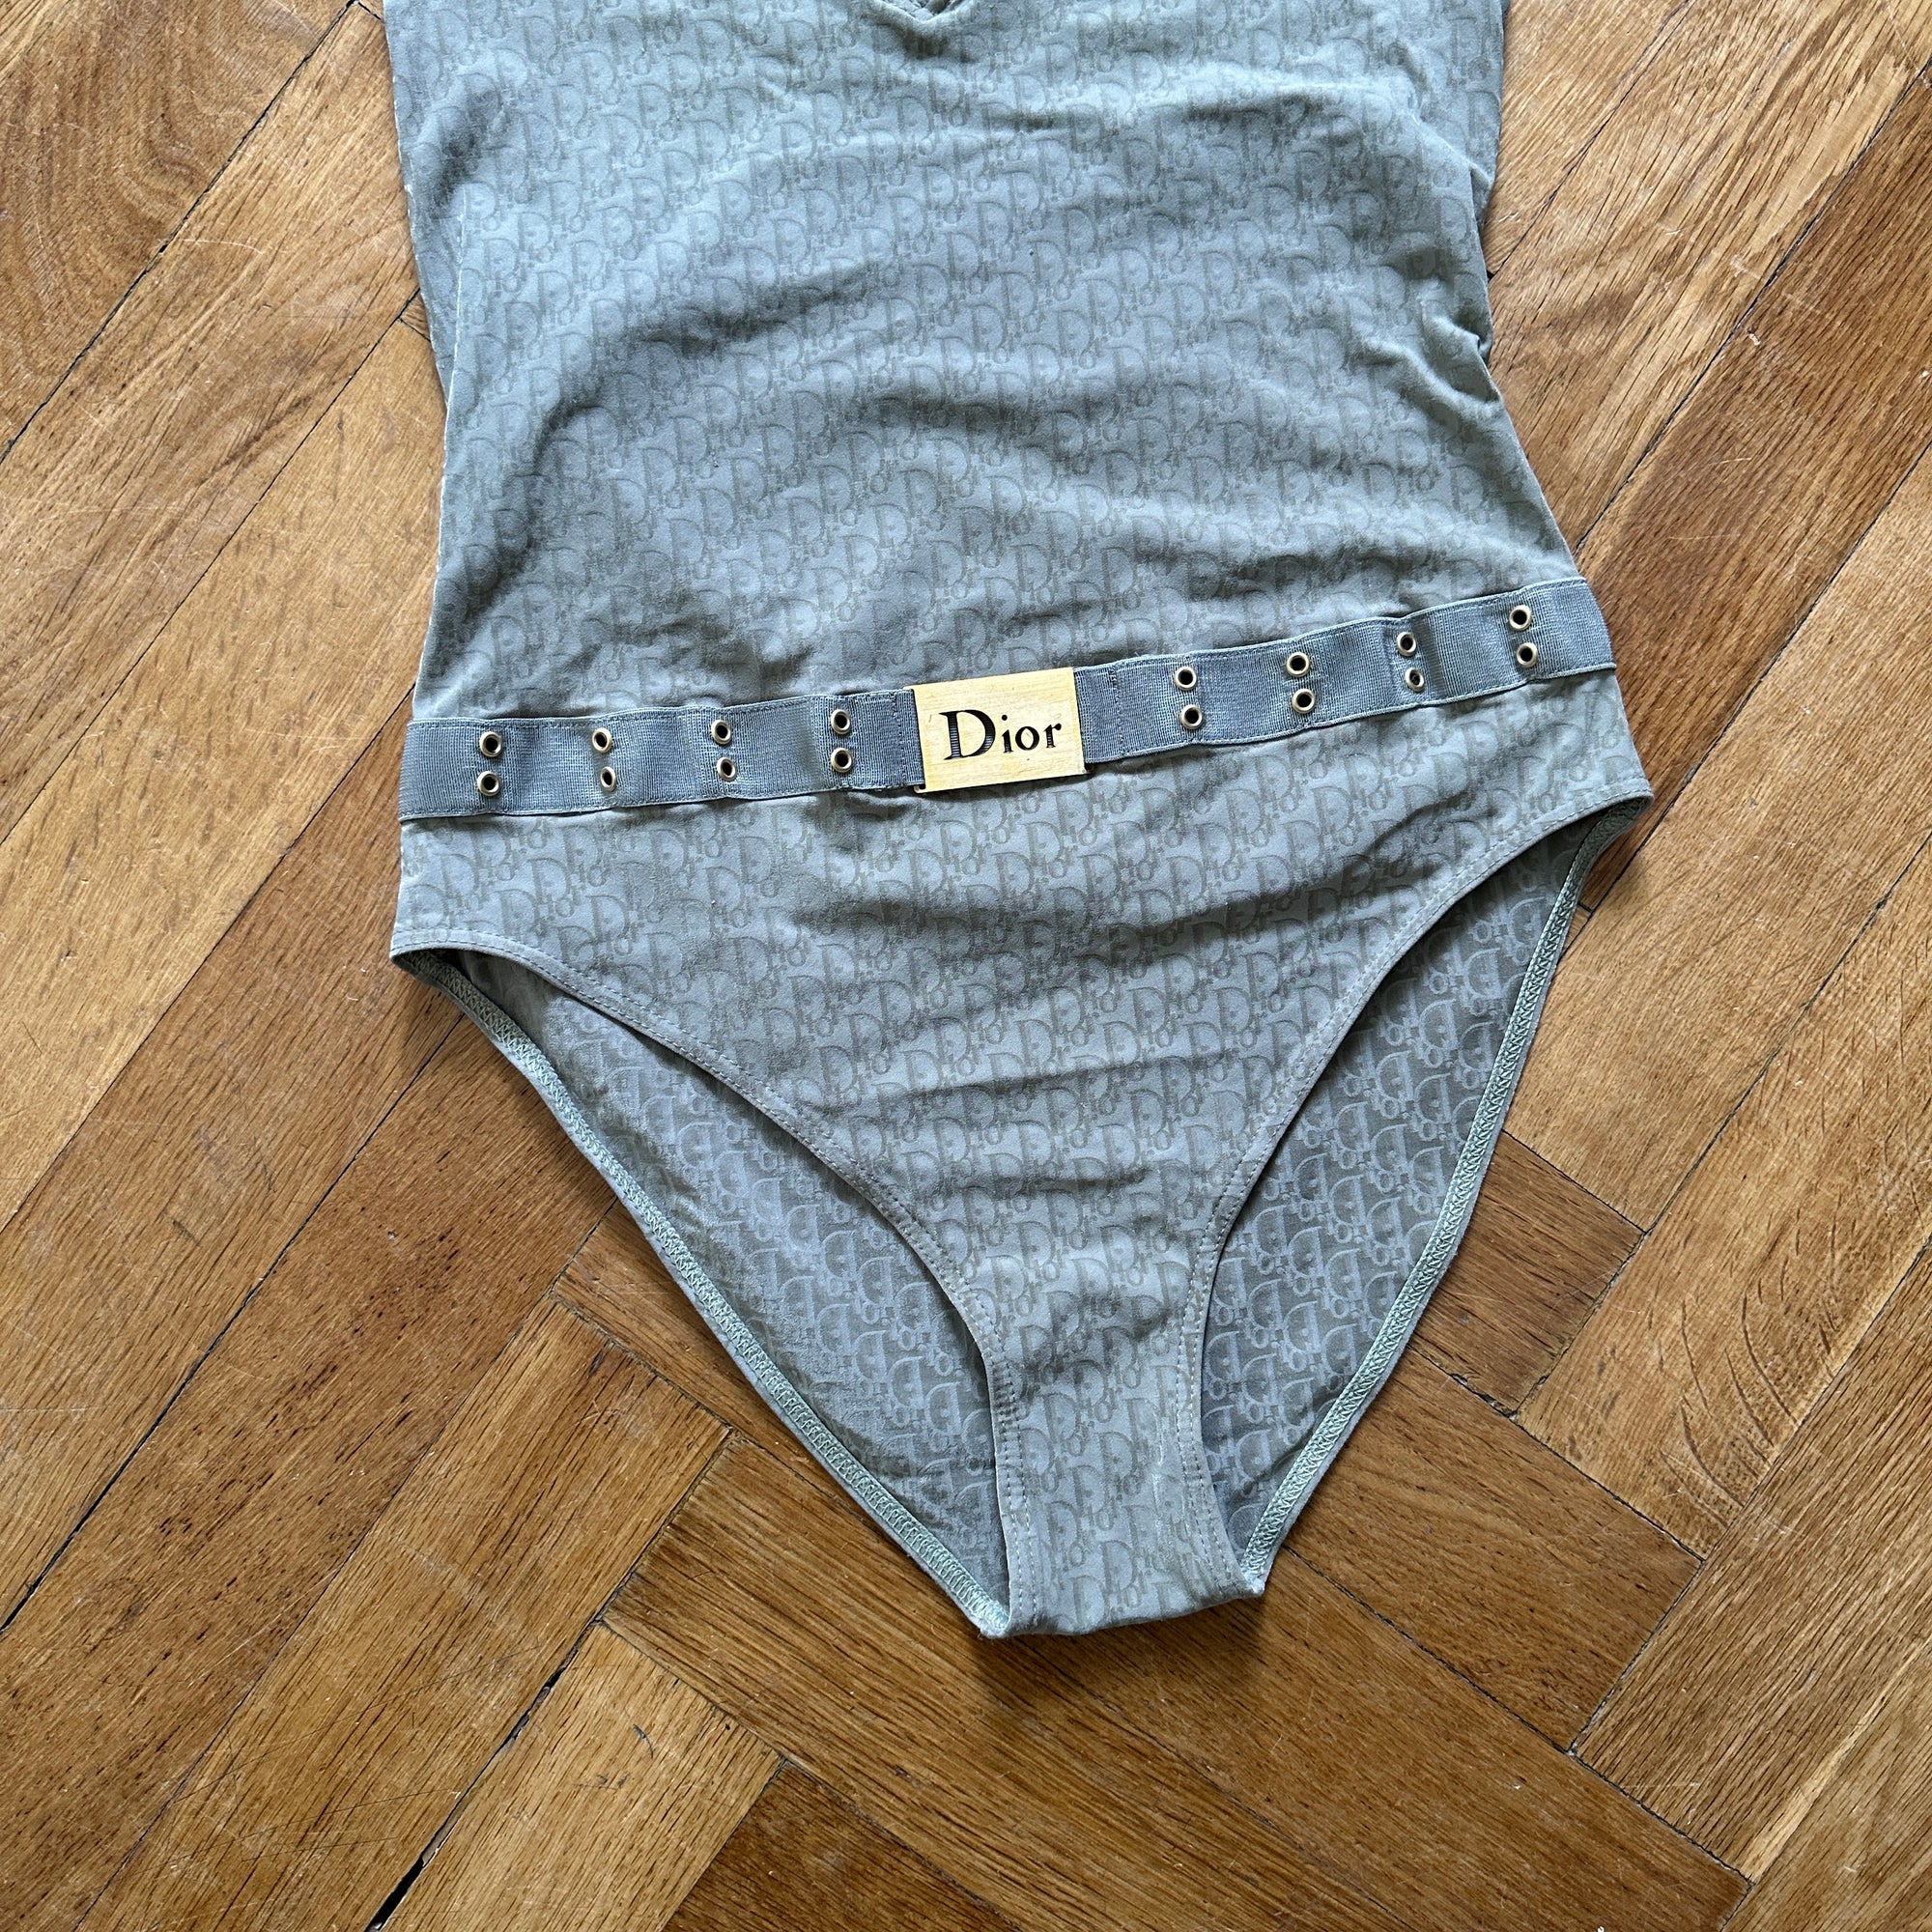 Christian Dior by John Galliano 2000s Belted Monogram Swimsuit